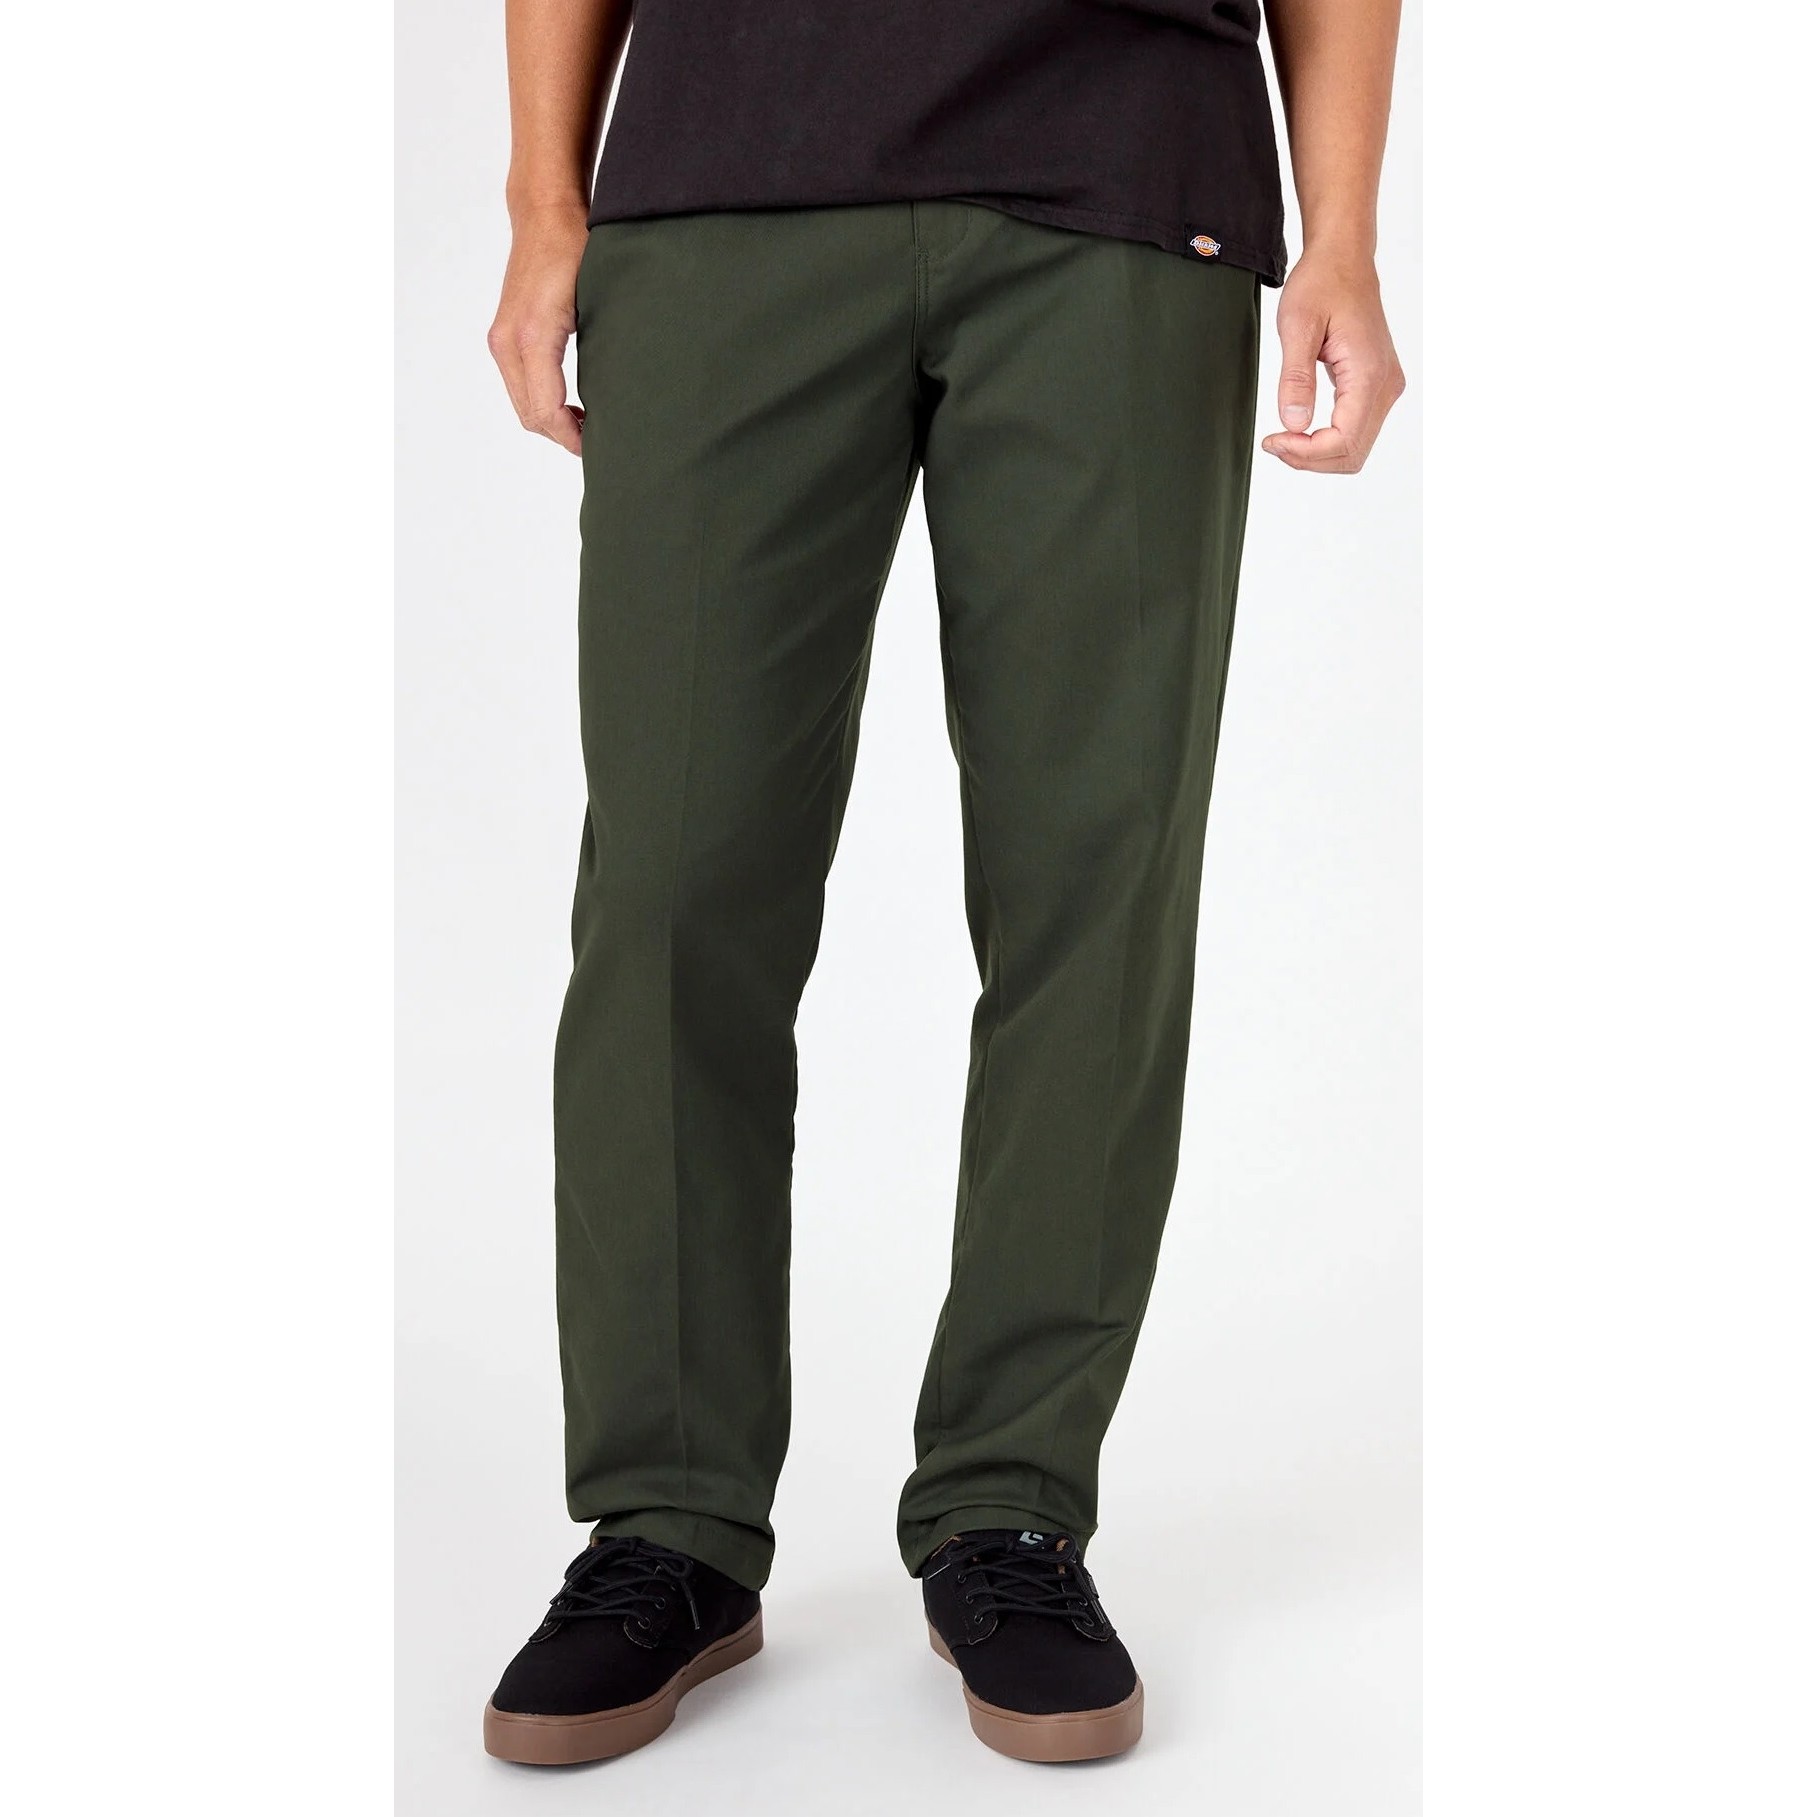 https://www.companybe.com/cowtown/product_photos/rd_images/rd_dickies-slim-fit-classic-work-pant-olive-green.jpg